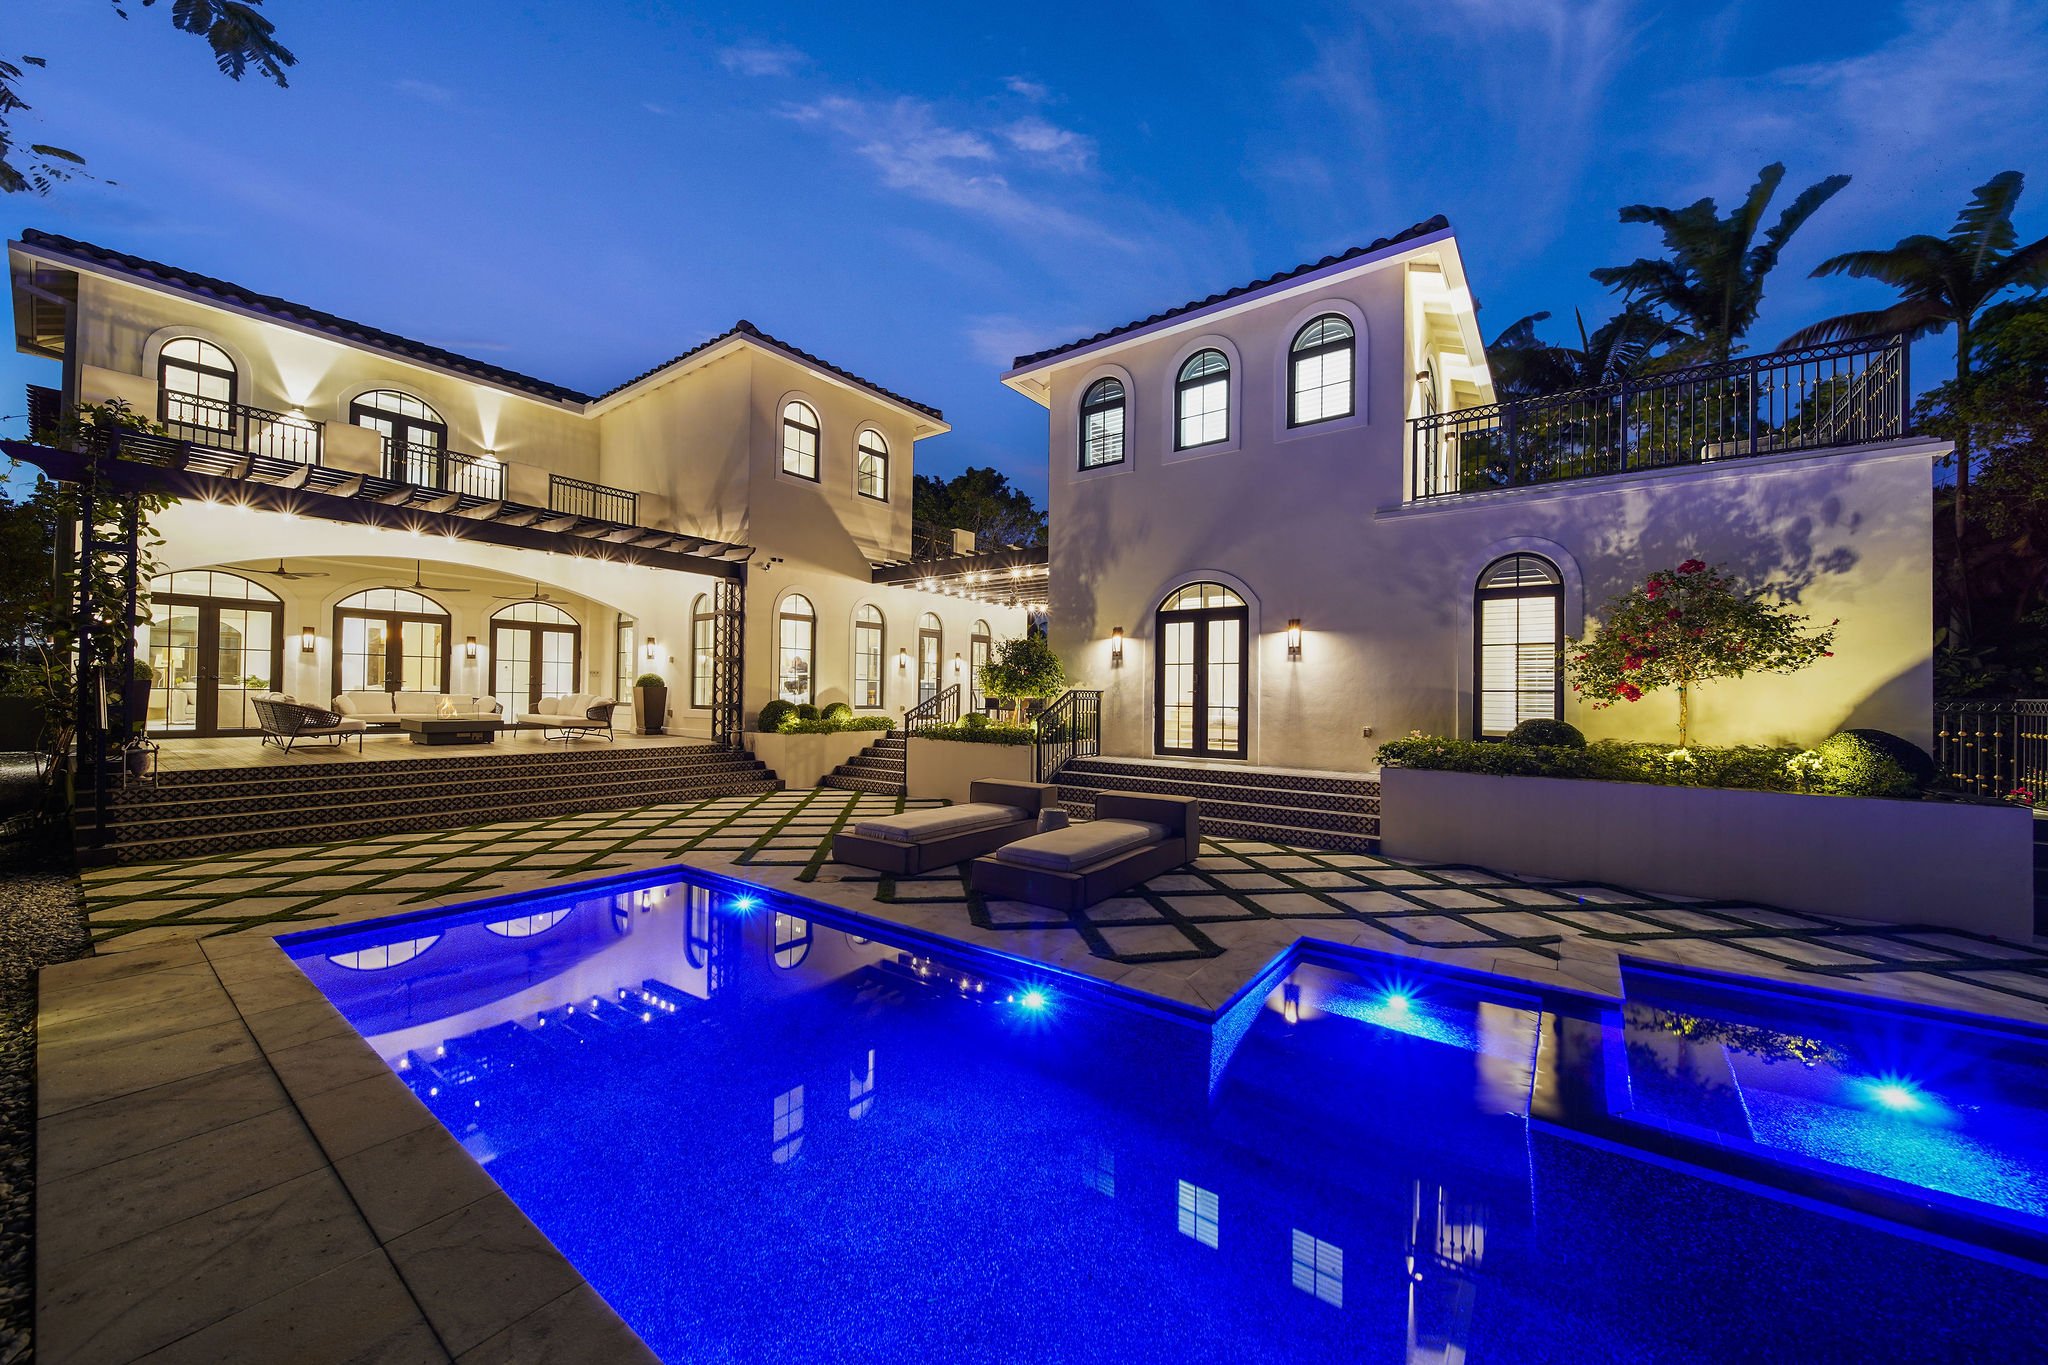 Non-Waterfront Home On Miami Beach Golf Course Sells For $9.5 Million 9.jpg